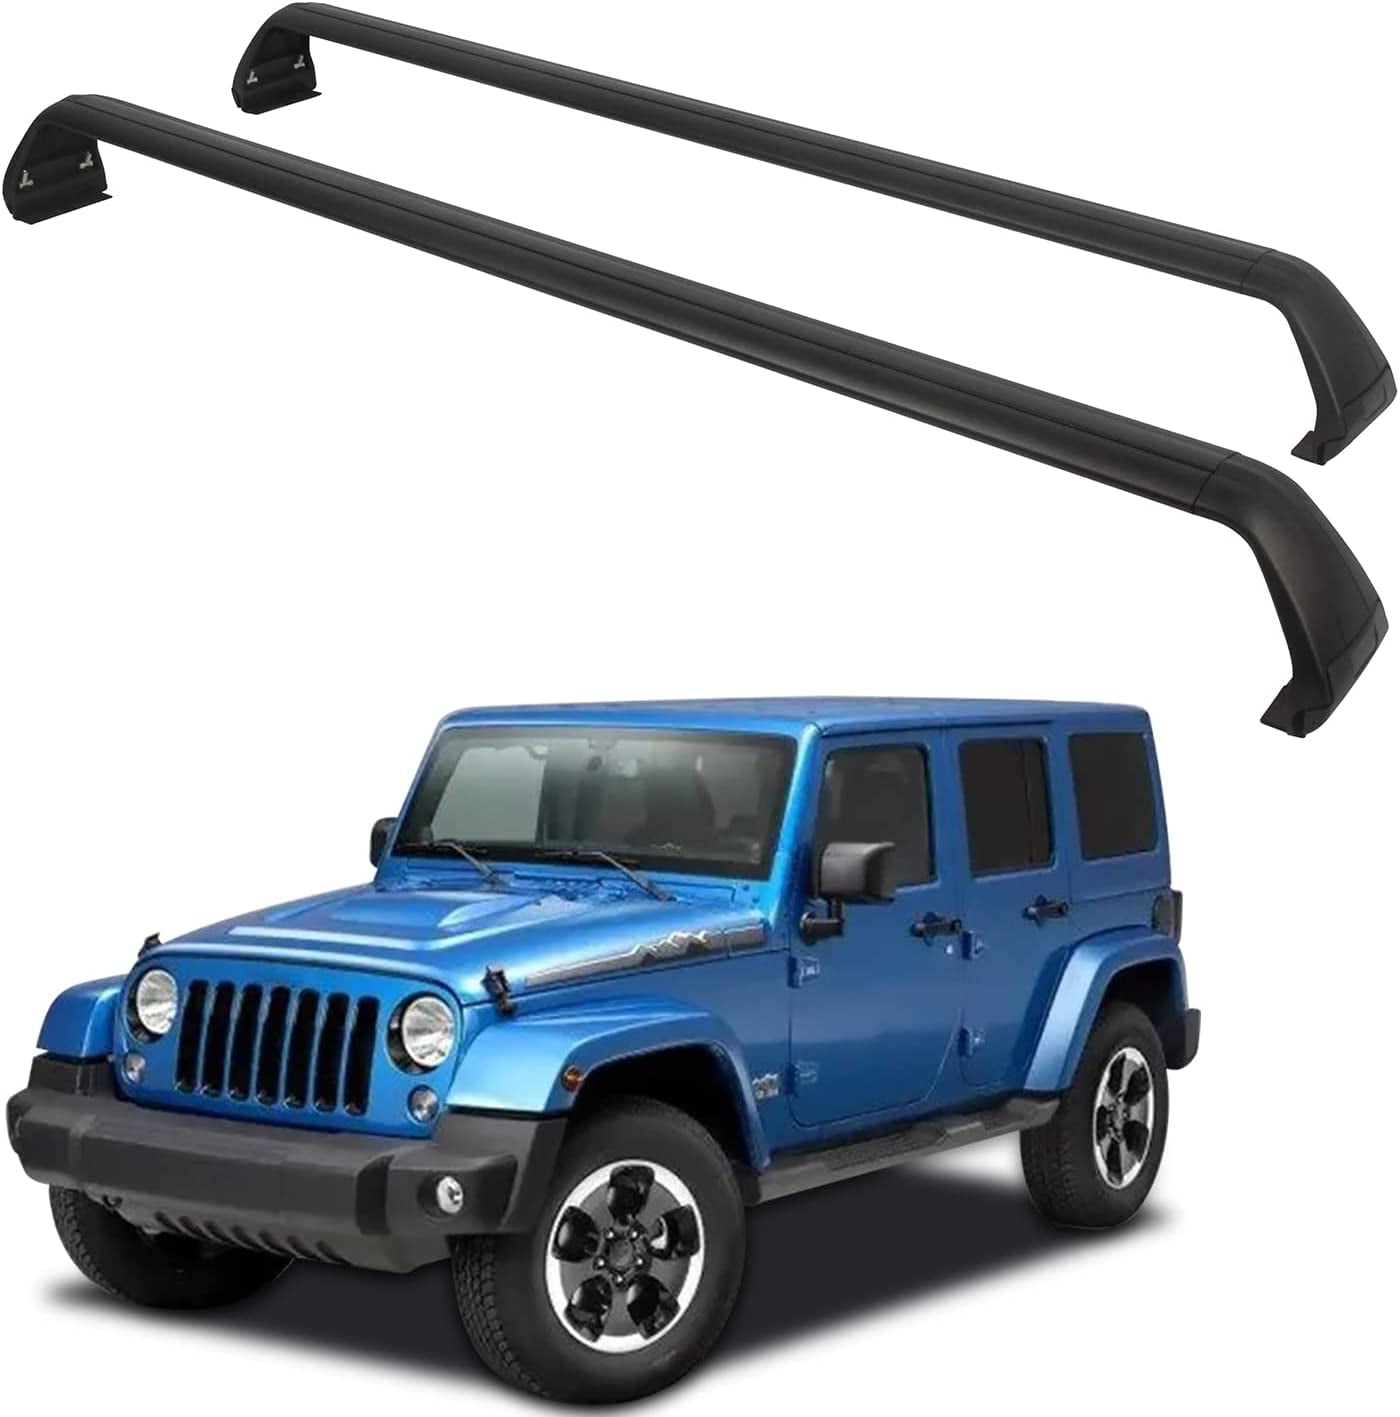 Buy Jinsanity Roof Rack Cross Bars Fit for Jeep Wrangler JK JL Gladiator JT  2007-2022 4-Door Hard Top Easy to Install Reduce Wind Resistance and Noise  Online at Lowest Price in Ubuy